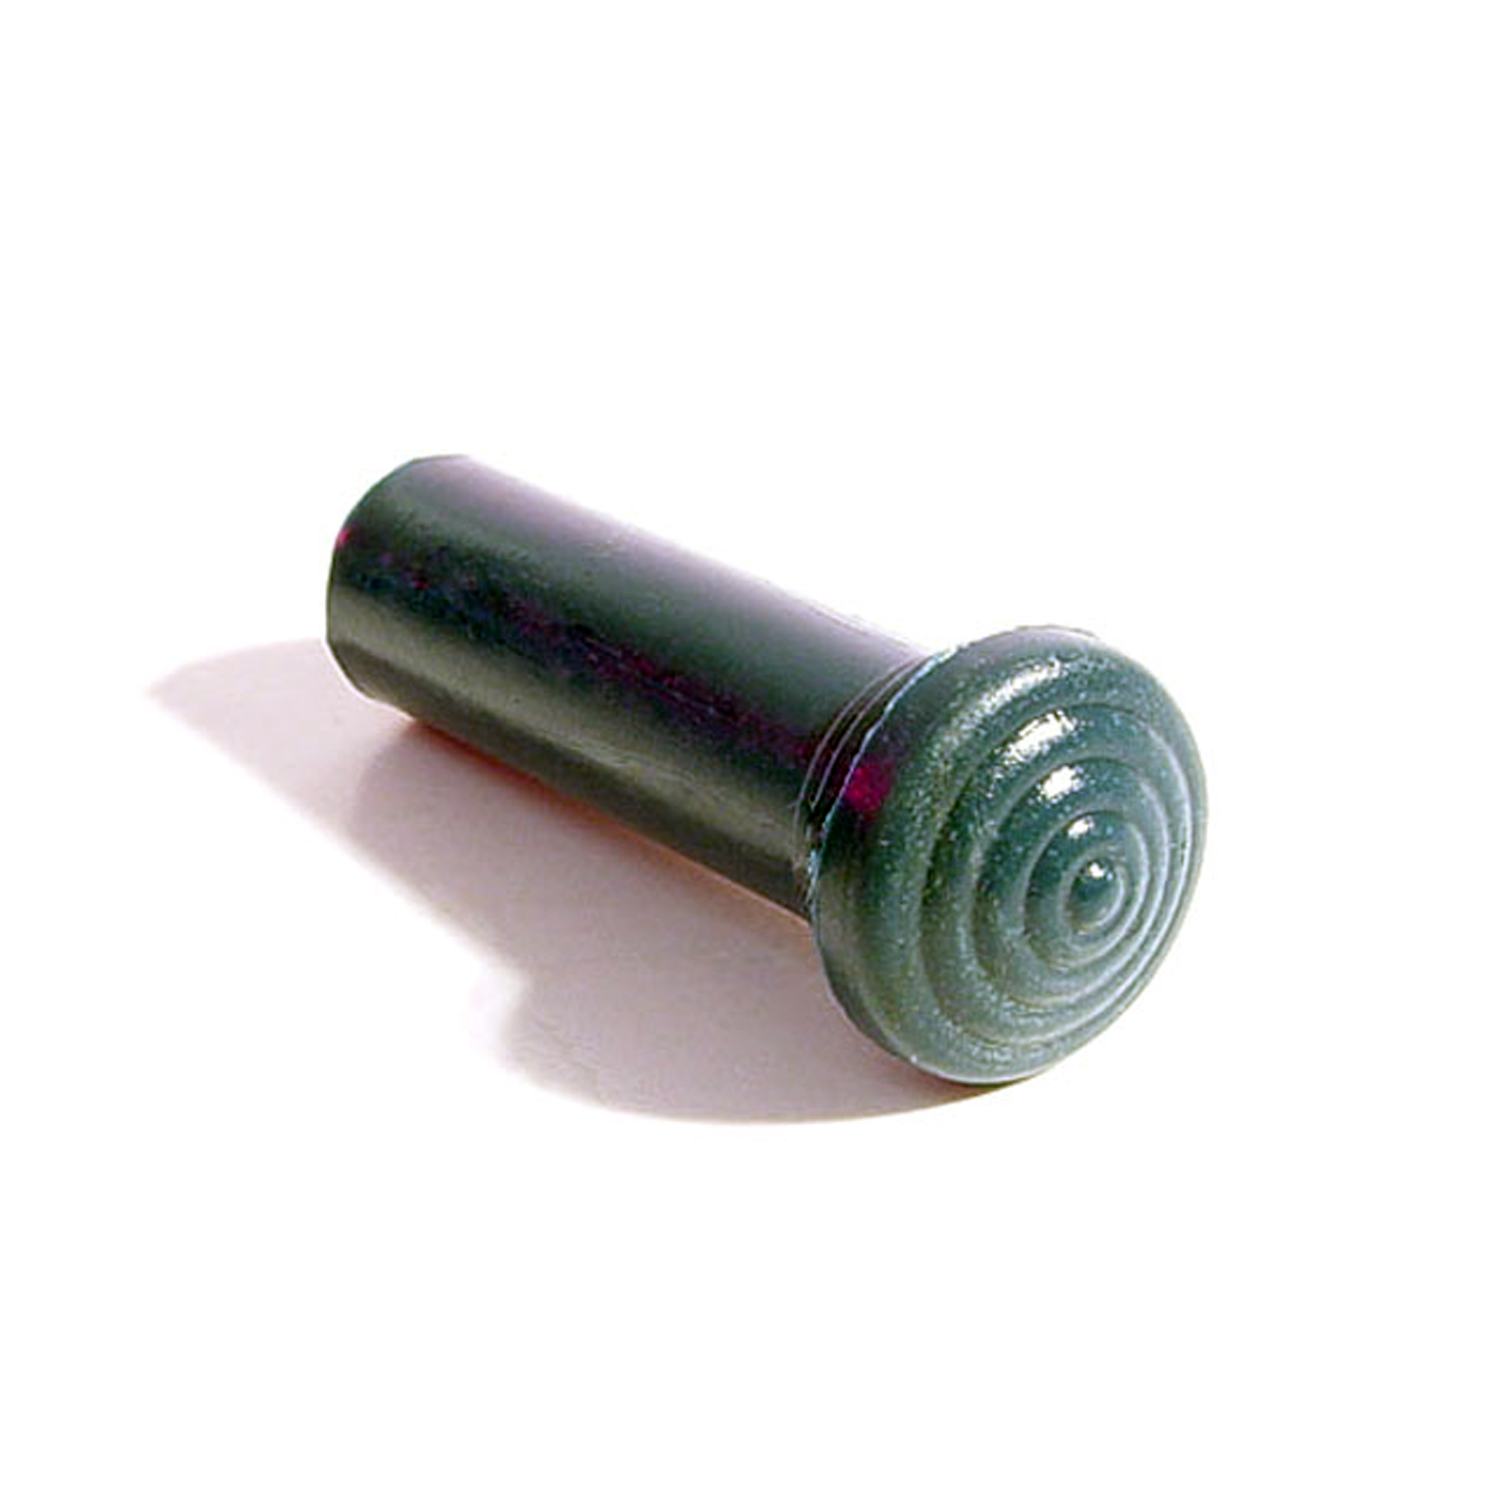 1941 Cadillac Series 60 Door Lock Knob.  Made of Wedgwood rubber, self-threading-RP 304-L